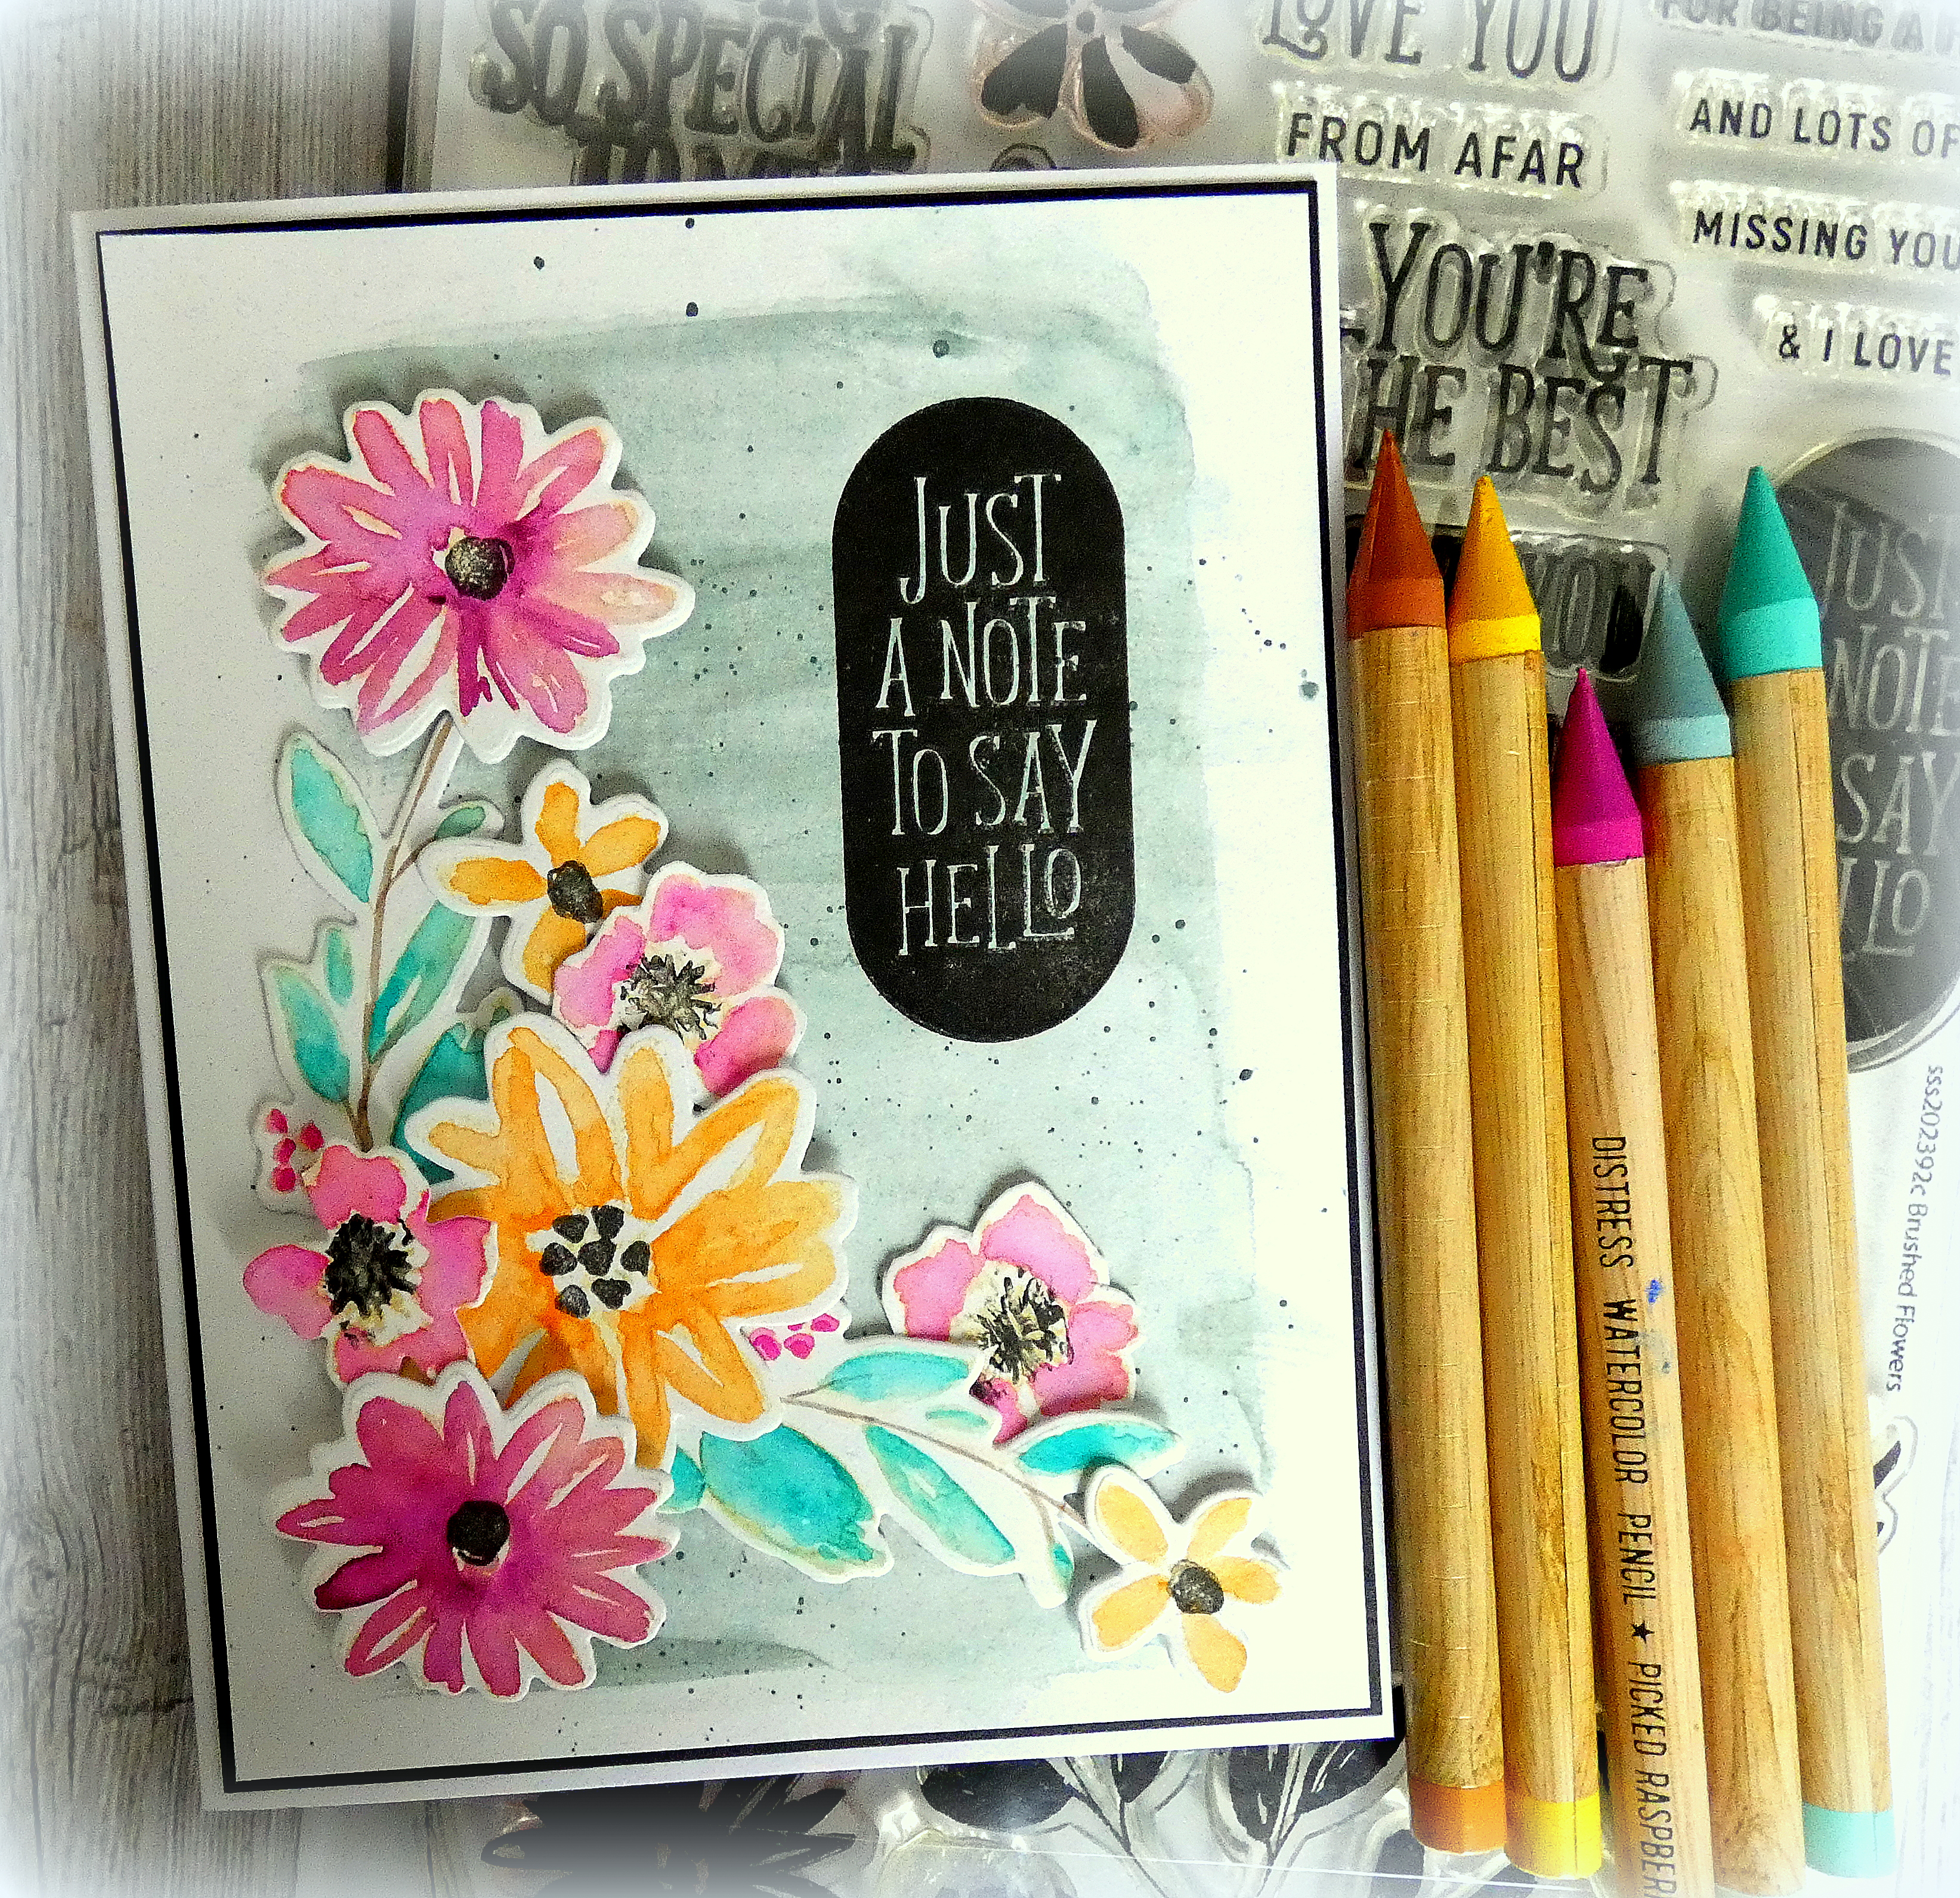 Best Watercolor Pencils to use in your Bullet Journal